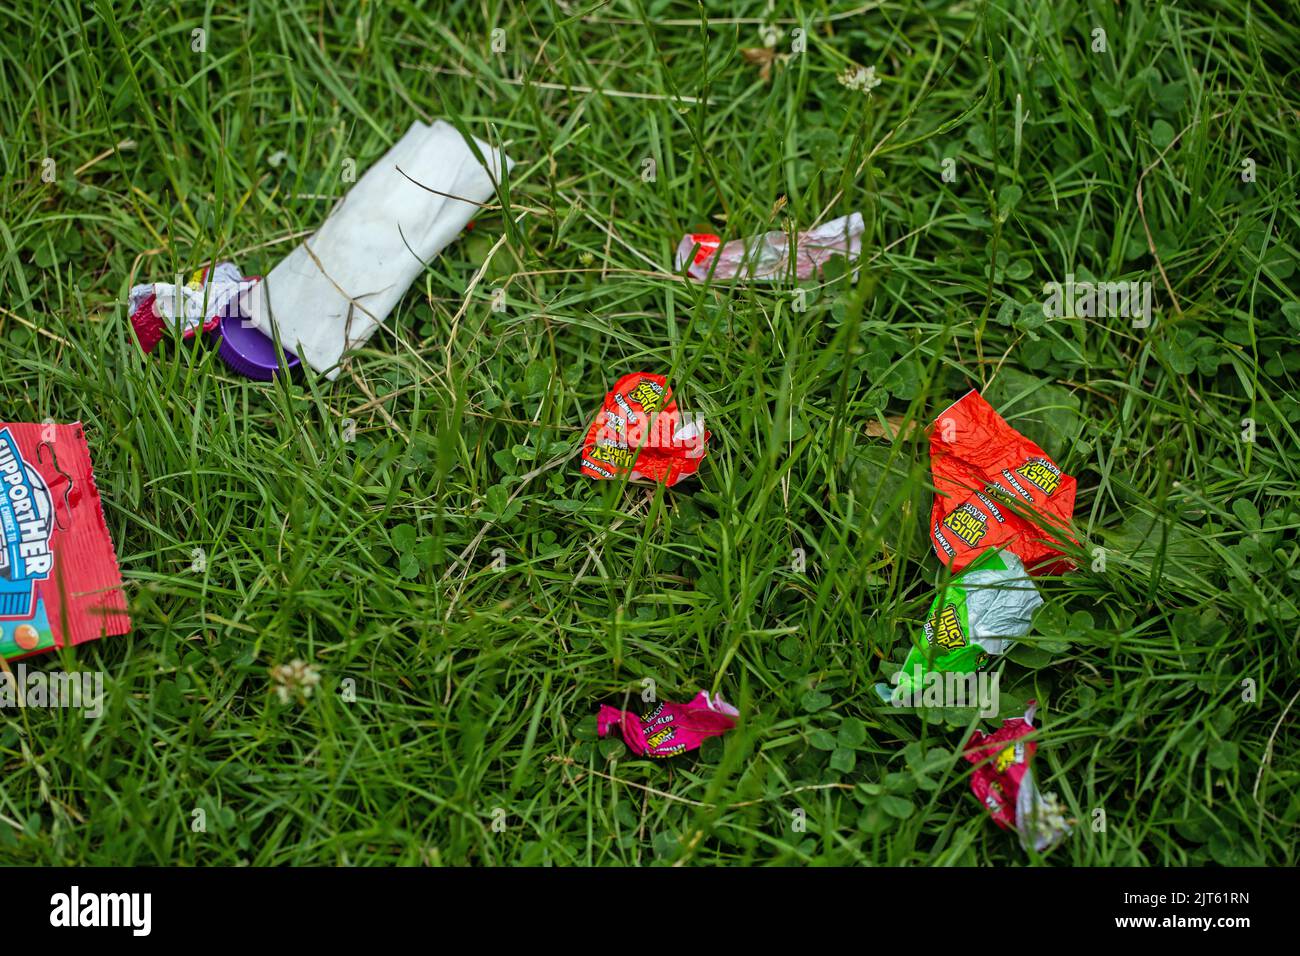 Wickford, Essex, England, June 19th 2022, Sweet wrappers left in a mess on grass Stock Photo